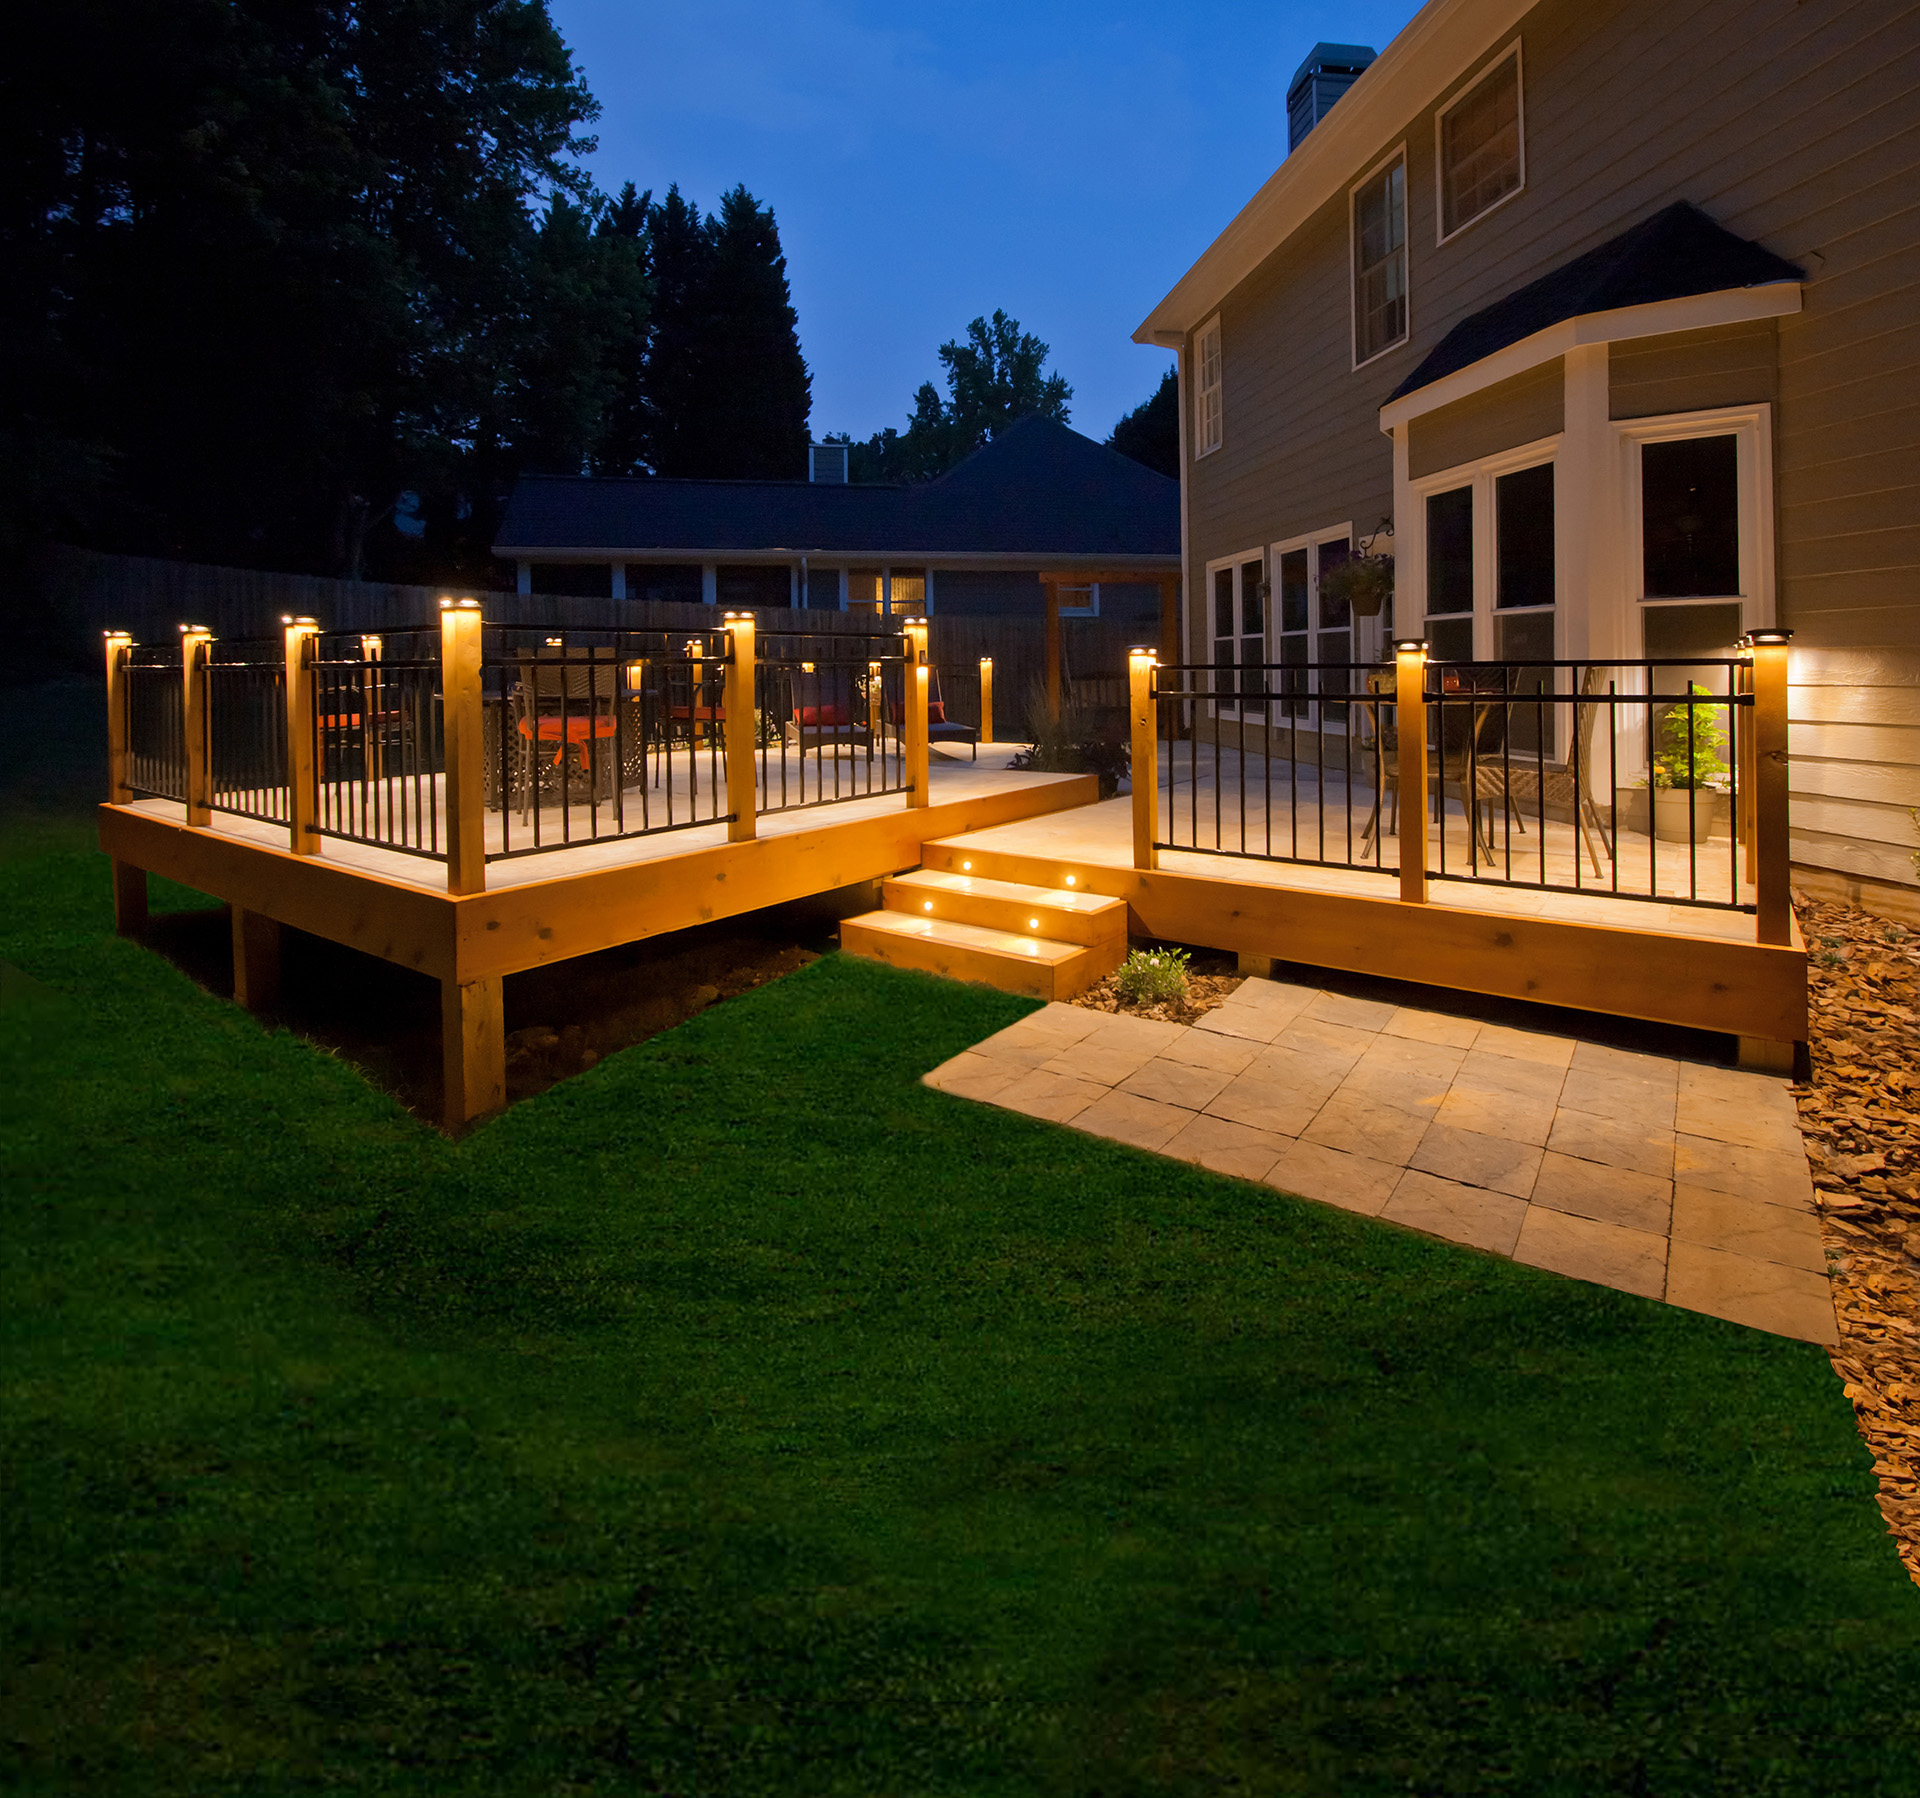 Deck post lights on exterior balcony railings creating light for the outdoor deck space.